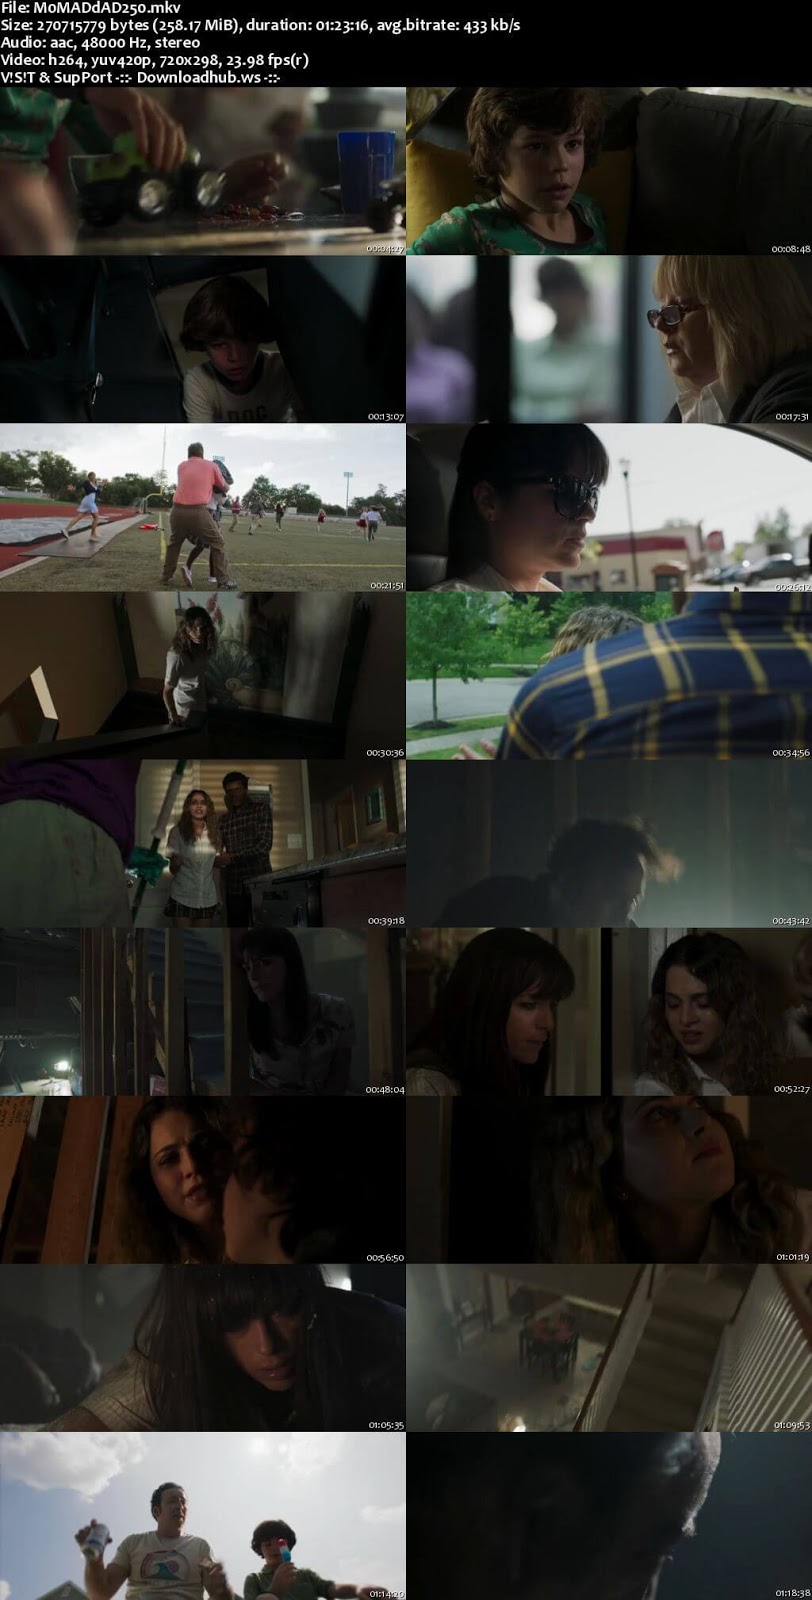 Mom and Dad 2018 English 480p Web-DL